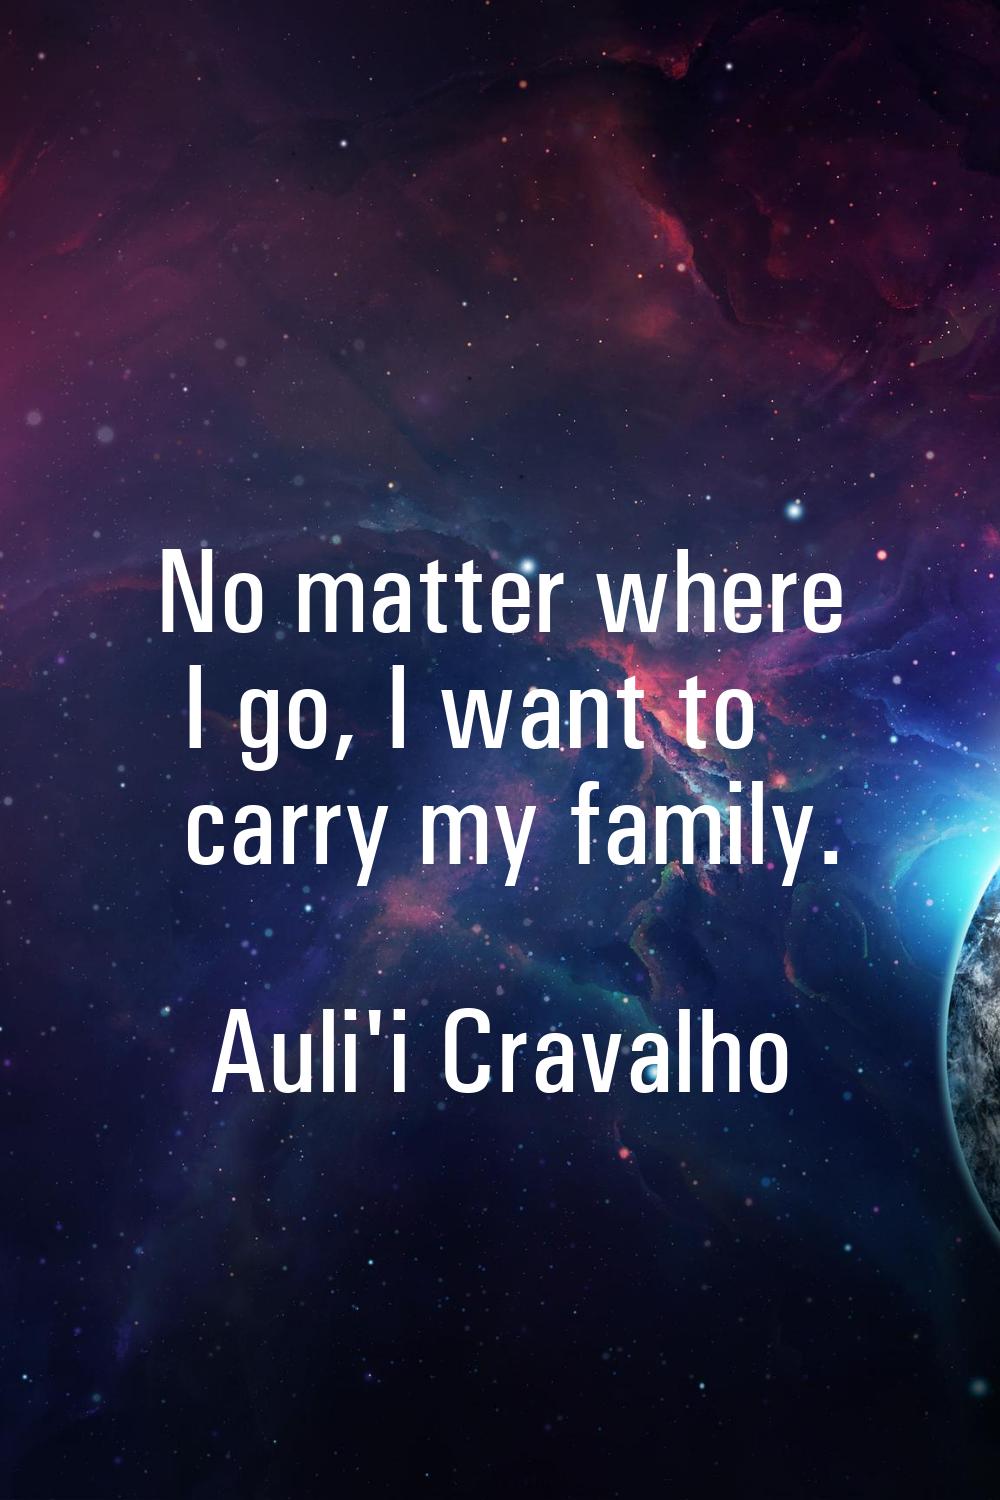 No matter where I go, I want to carry my family.